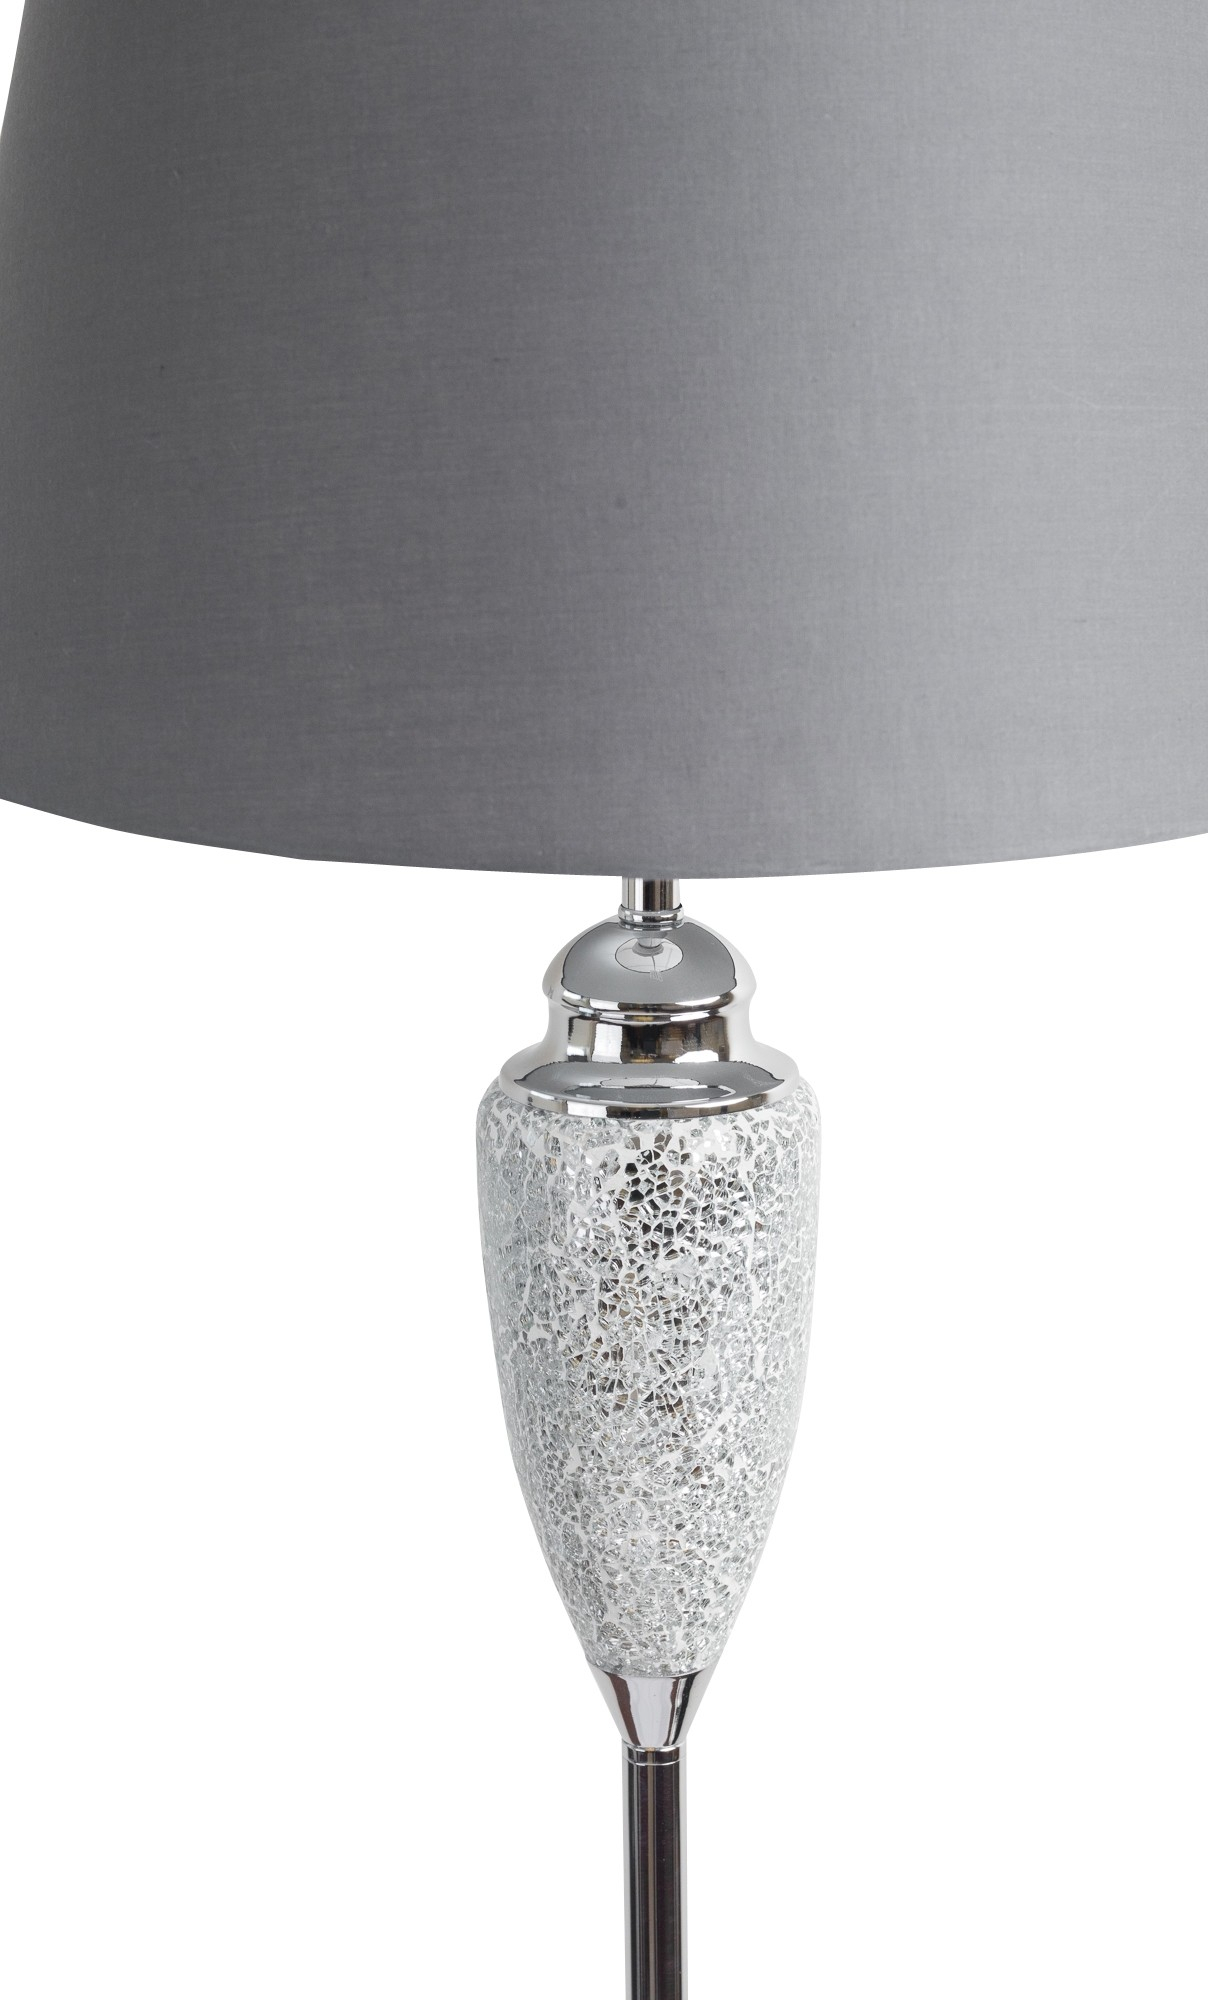 Mirrored Crackle Glass Floor Lamp With Grey Shade throughout size 1208 X 2000